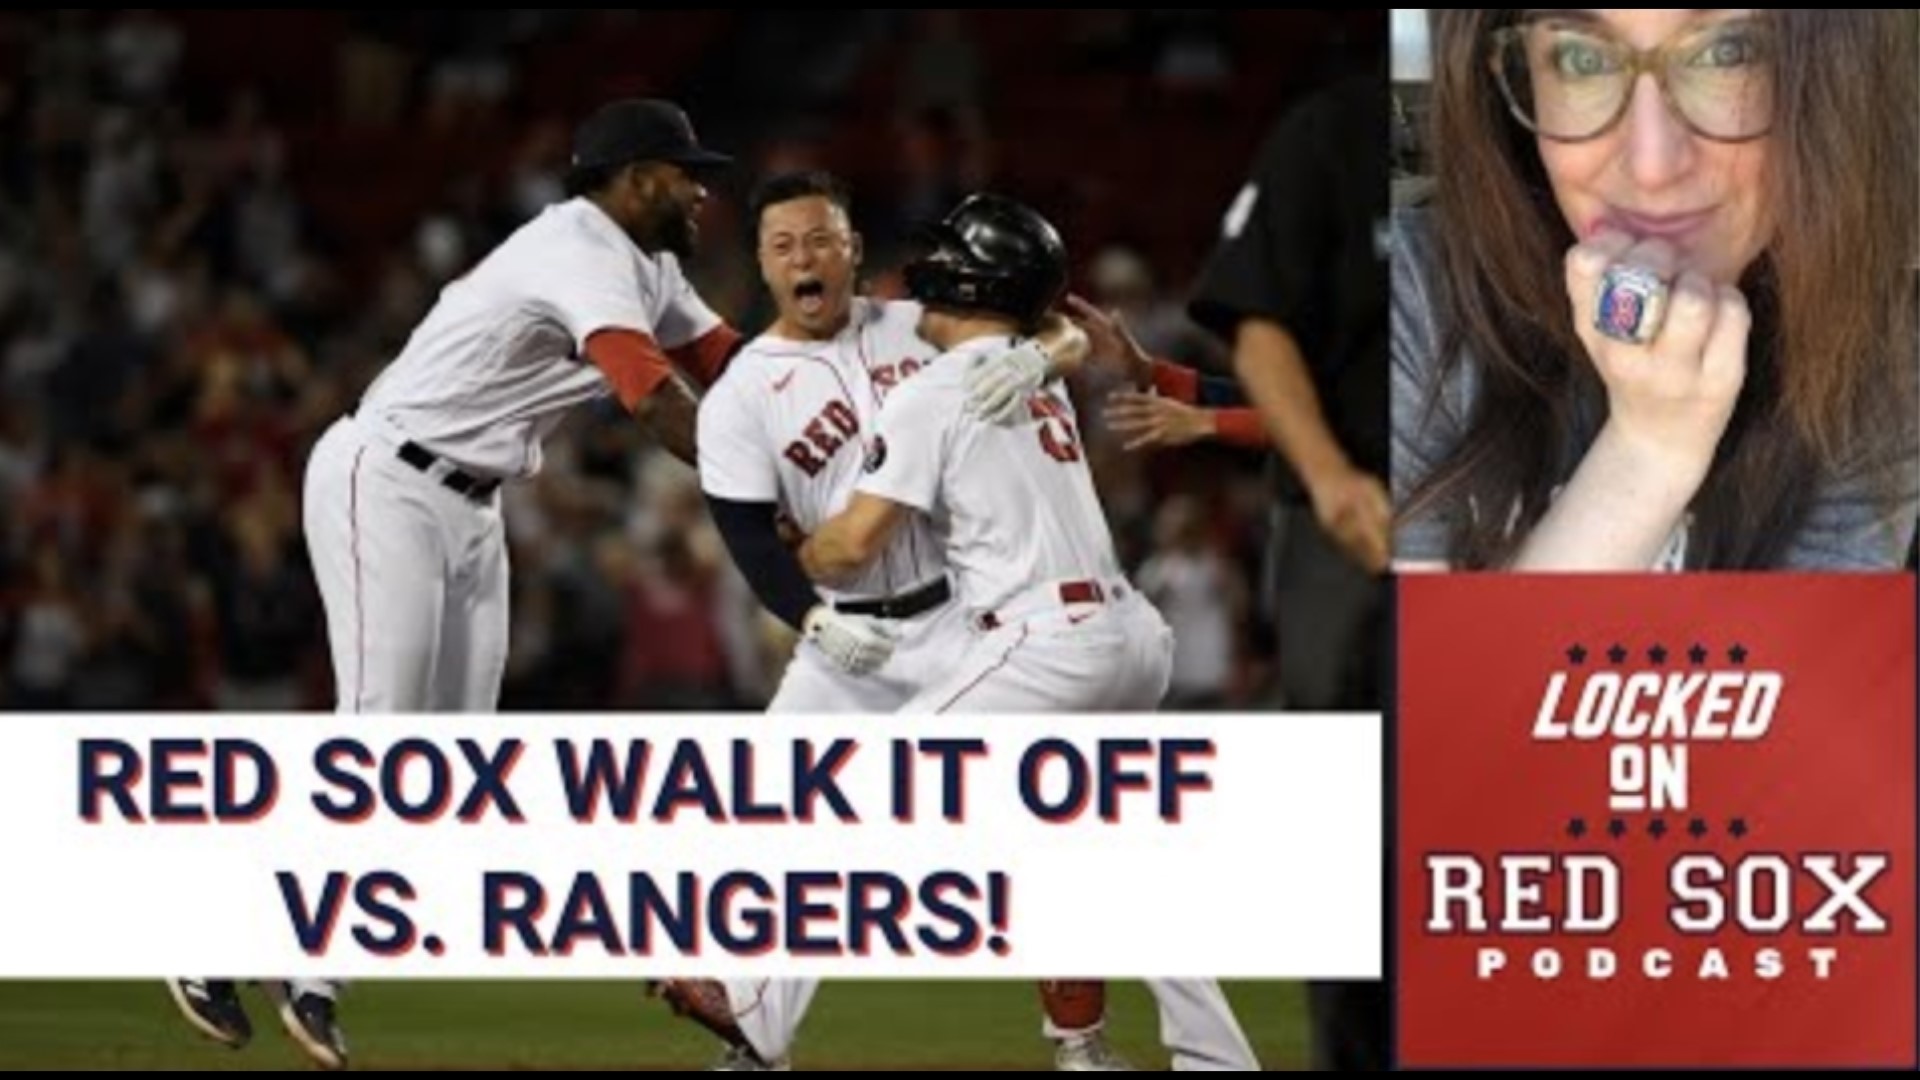 Rob Refsnyder, sleep-deprived and all, hit the walk-off single in the ninth inning to cap off the Boston Red Sox's comeback victory over the Texas Rangers.